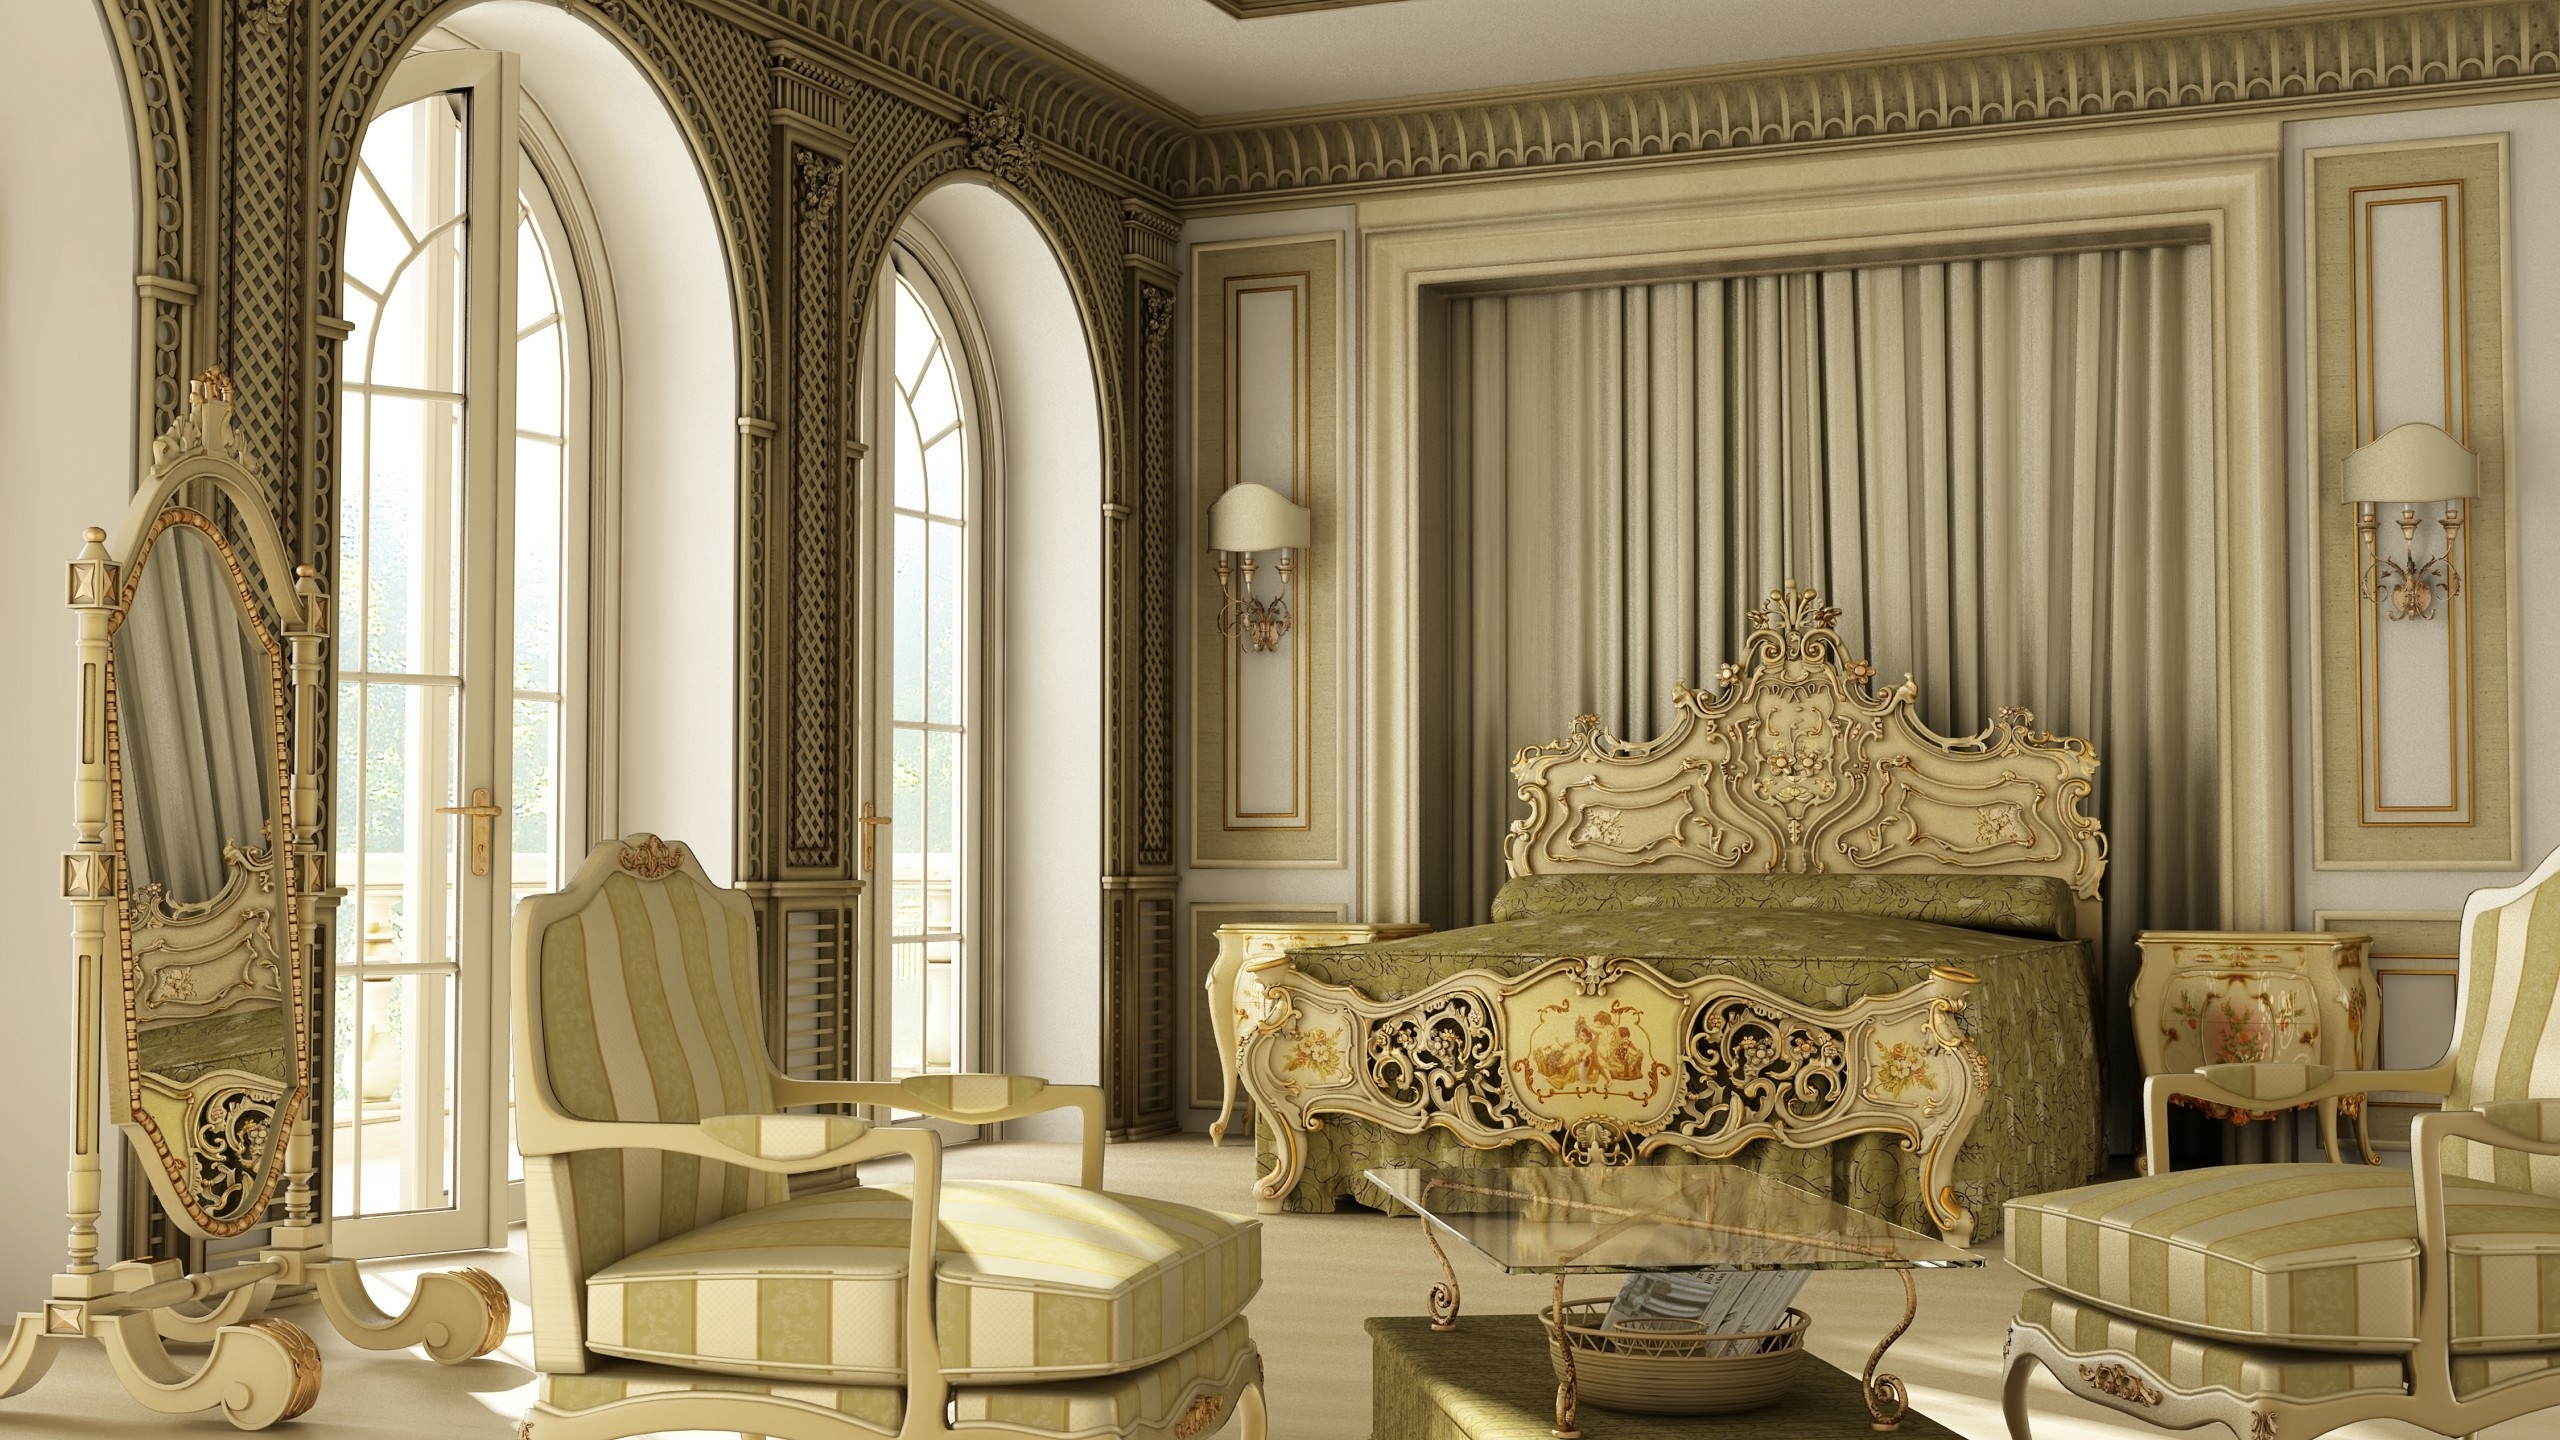 Imperial Bedroom for 2560x1440 HDTV resolution